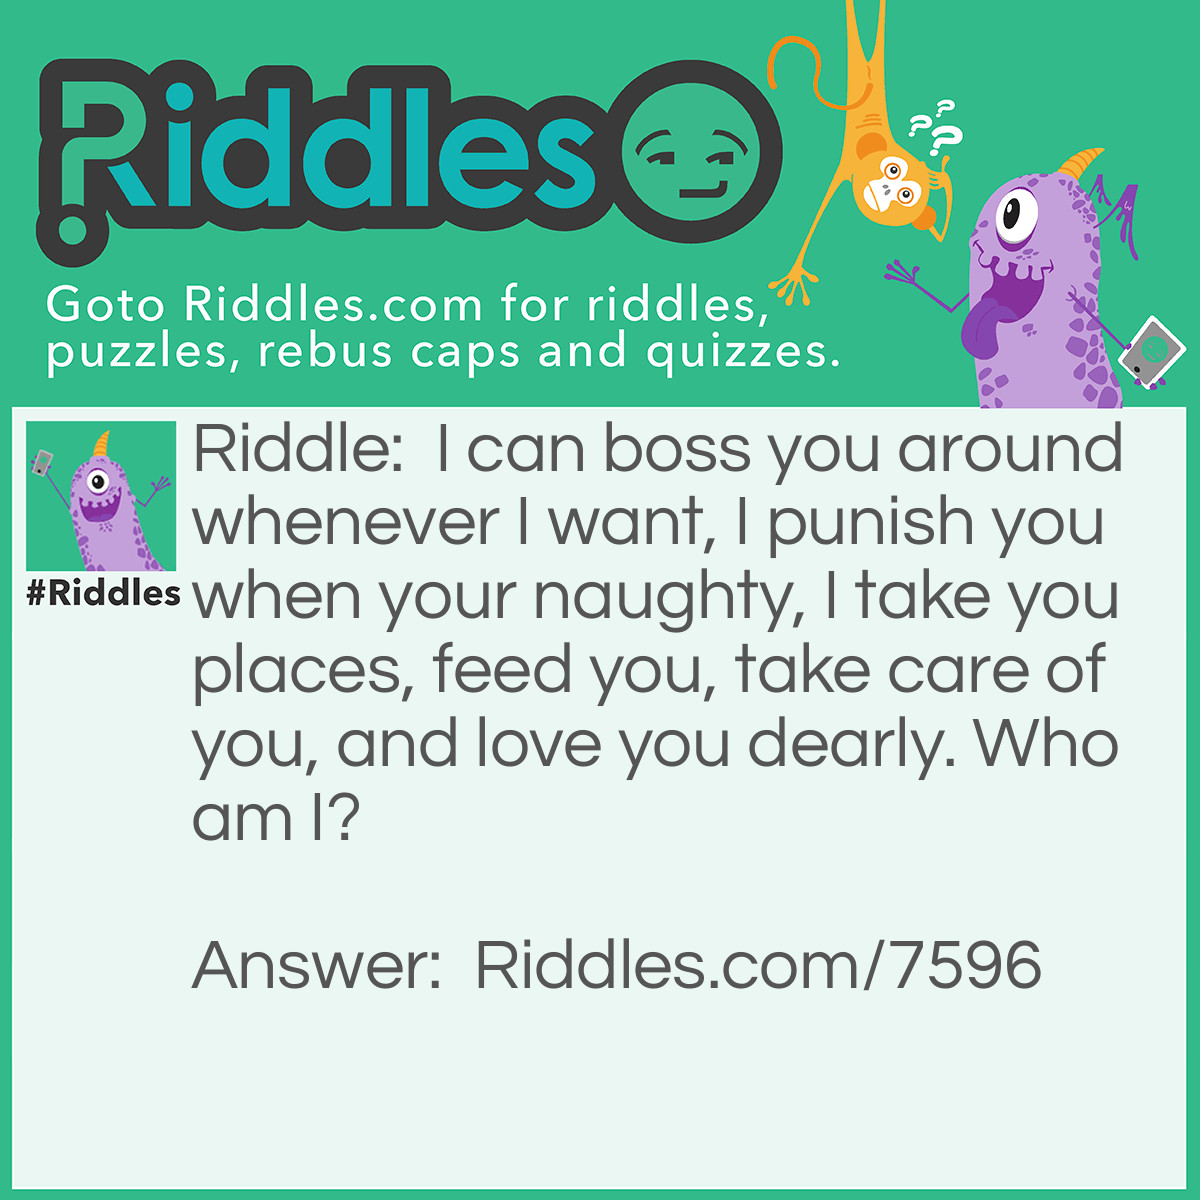 Riddle: I can boss you around whenever I want, I punish you when your naughty, I take you places, feed you, take care of you, and love you dearly. Who am I? Answer: I'm a mom.